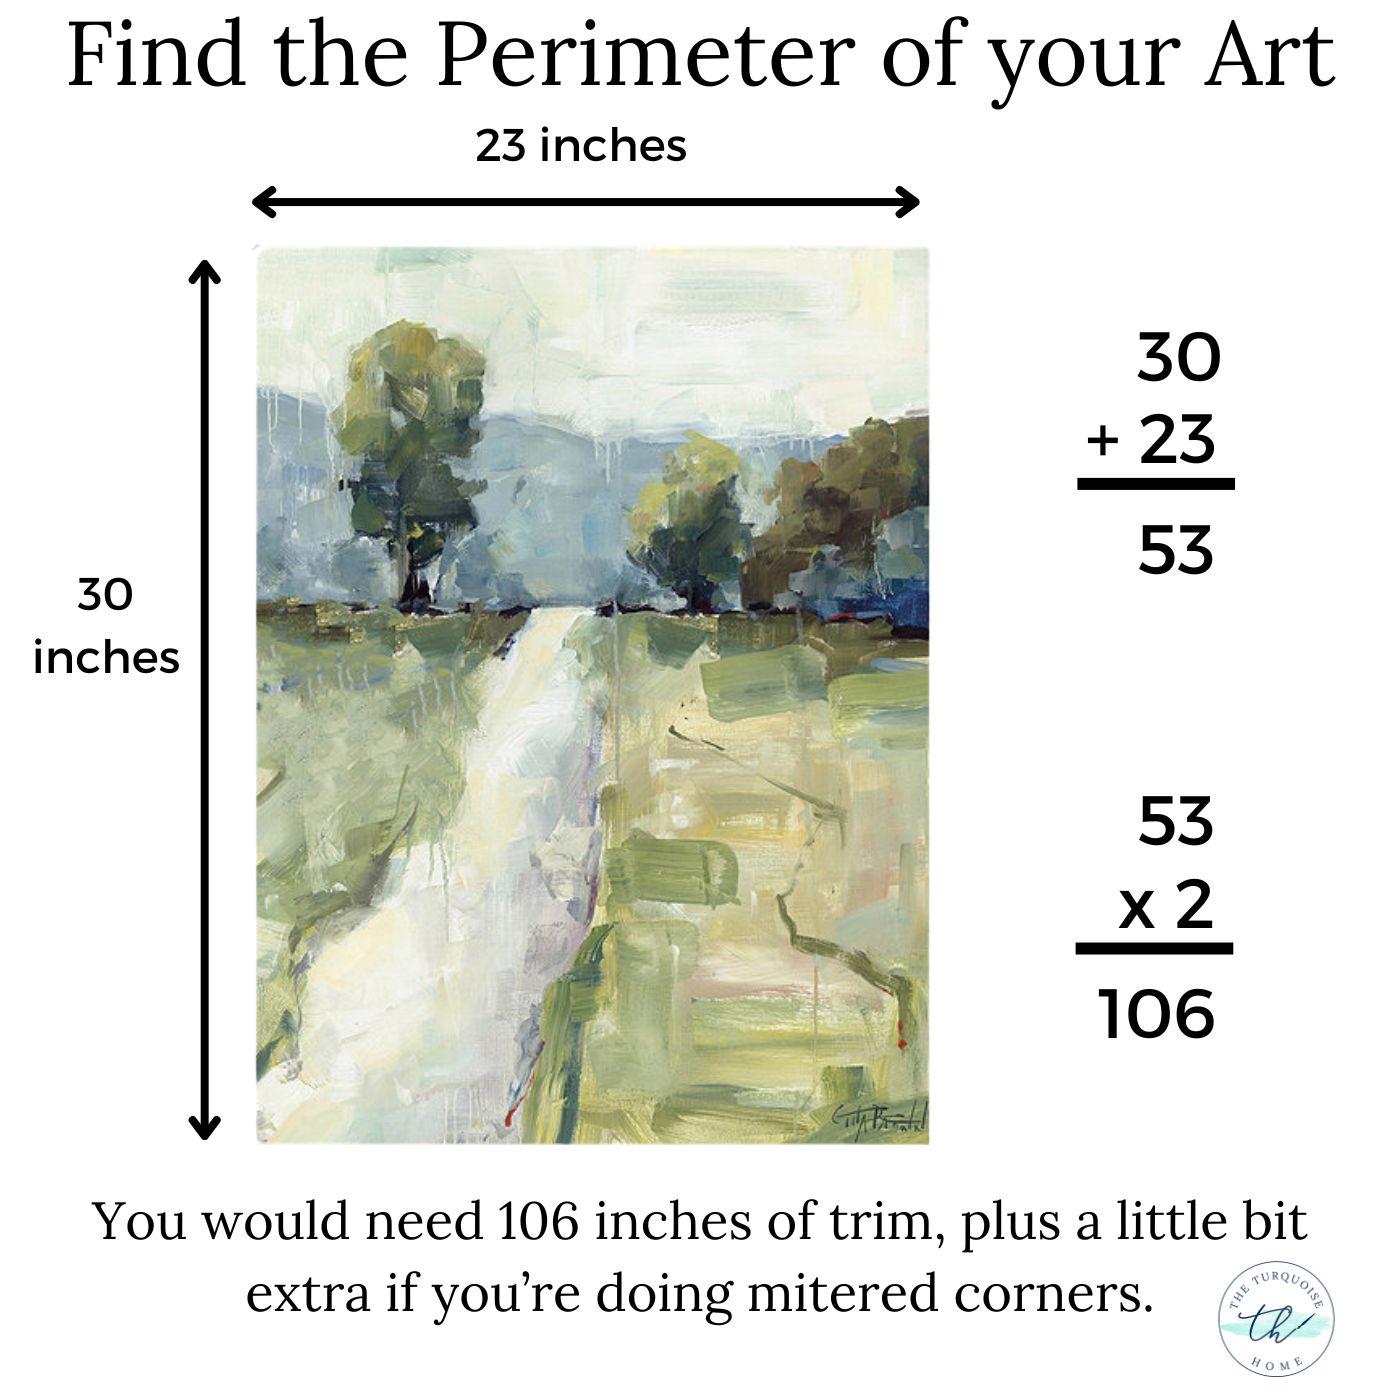 how to find the perimeter of art to frame it